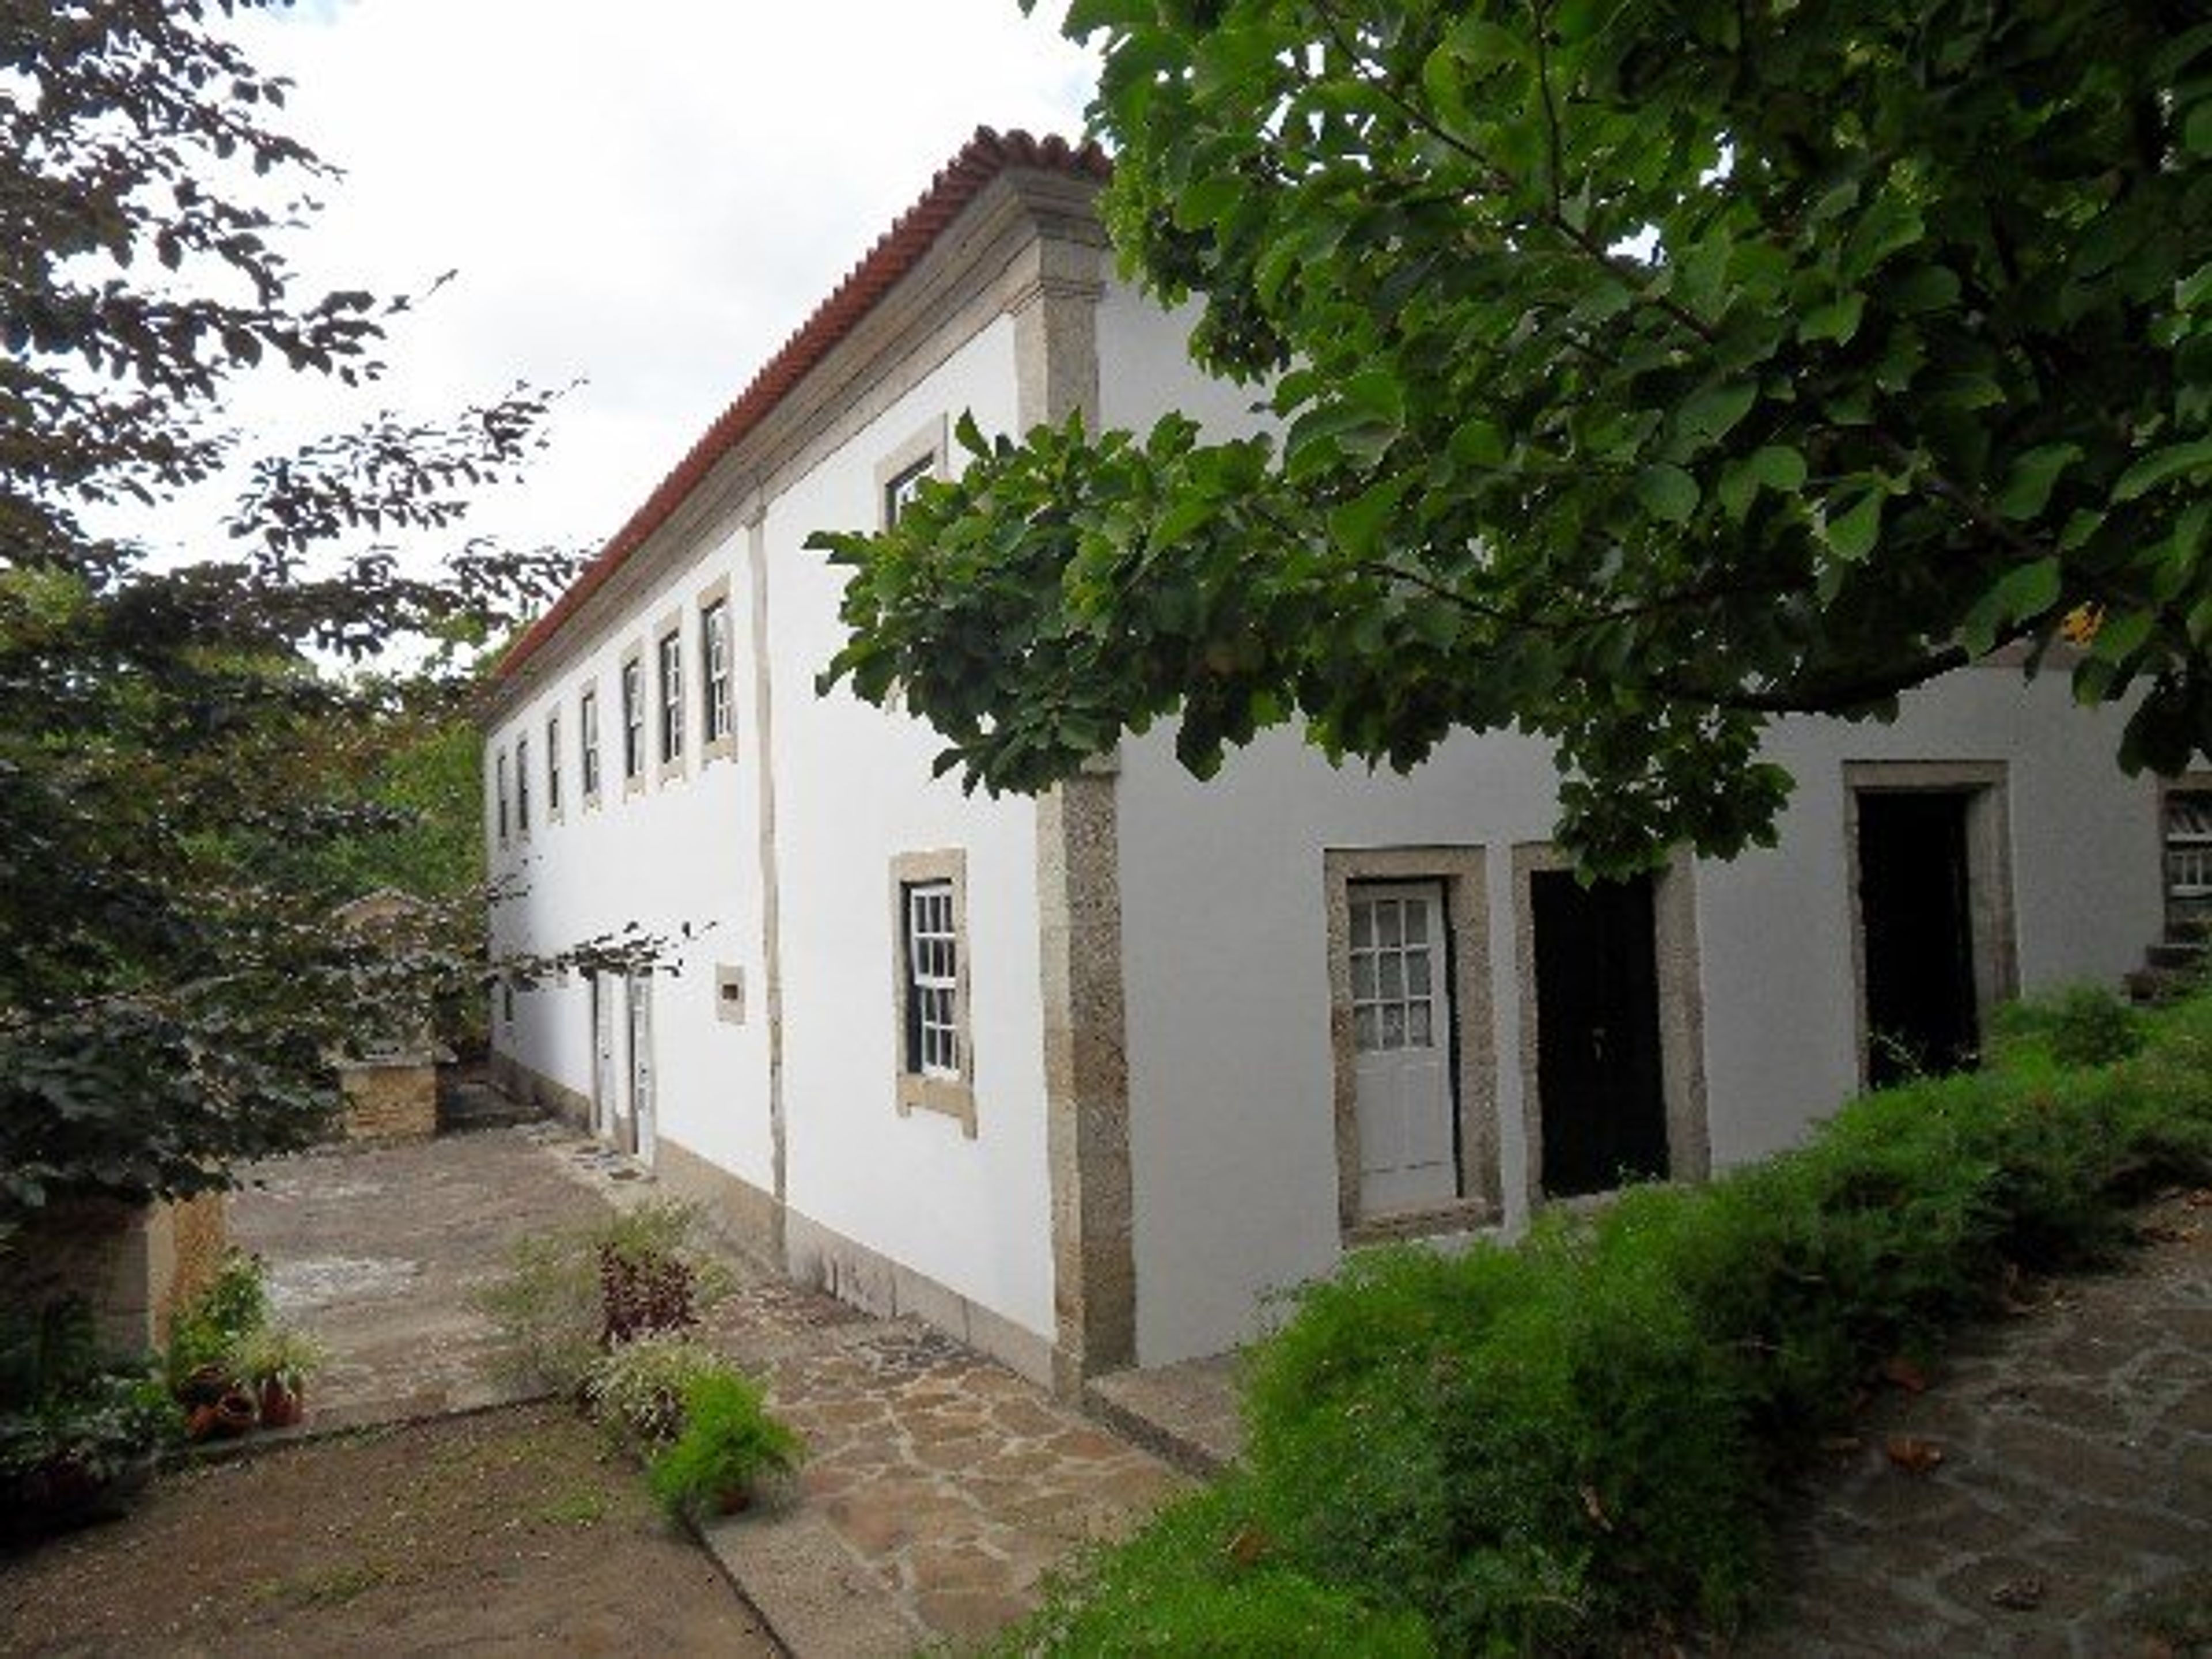 Main View of The House